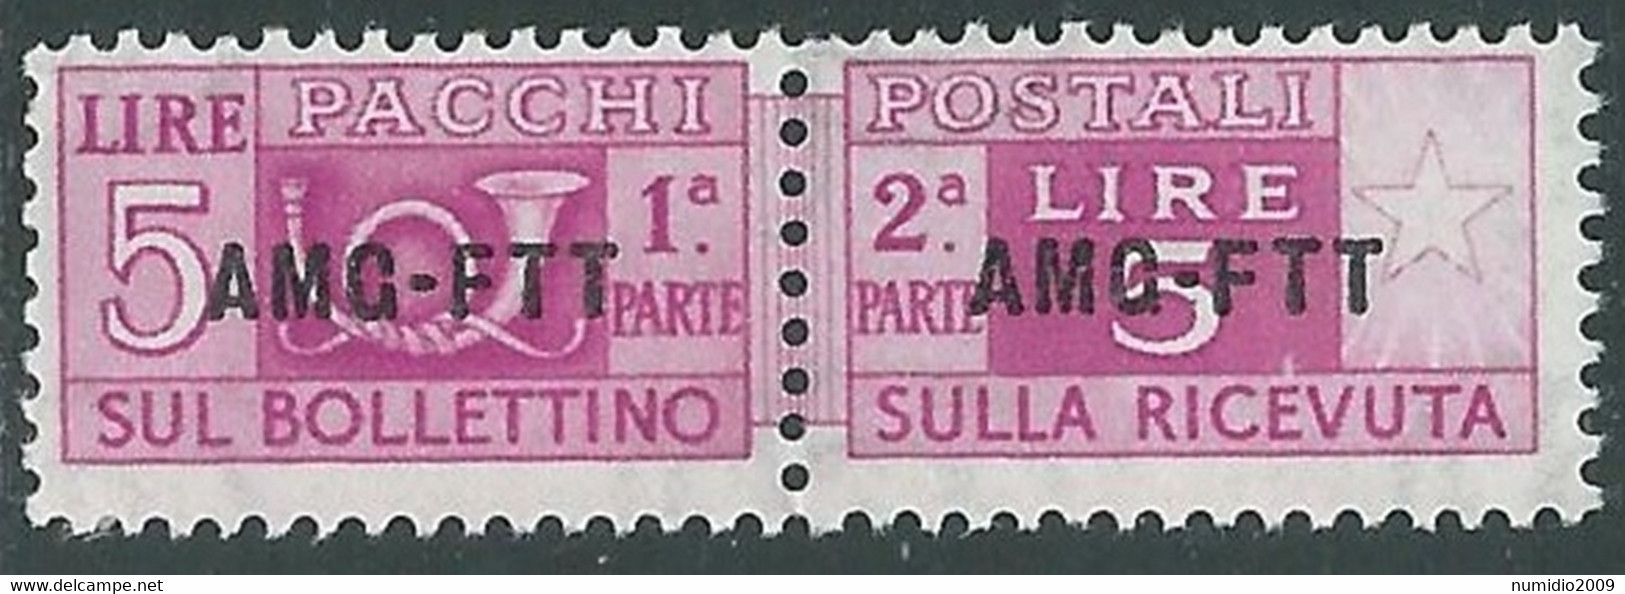 1949-53 TRIESTE A PACCHI POSTALI 5 LIRE MNH ** - RE25-9 - Postal And Consigned Parcels